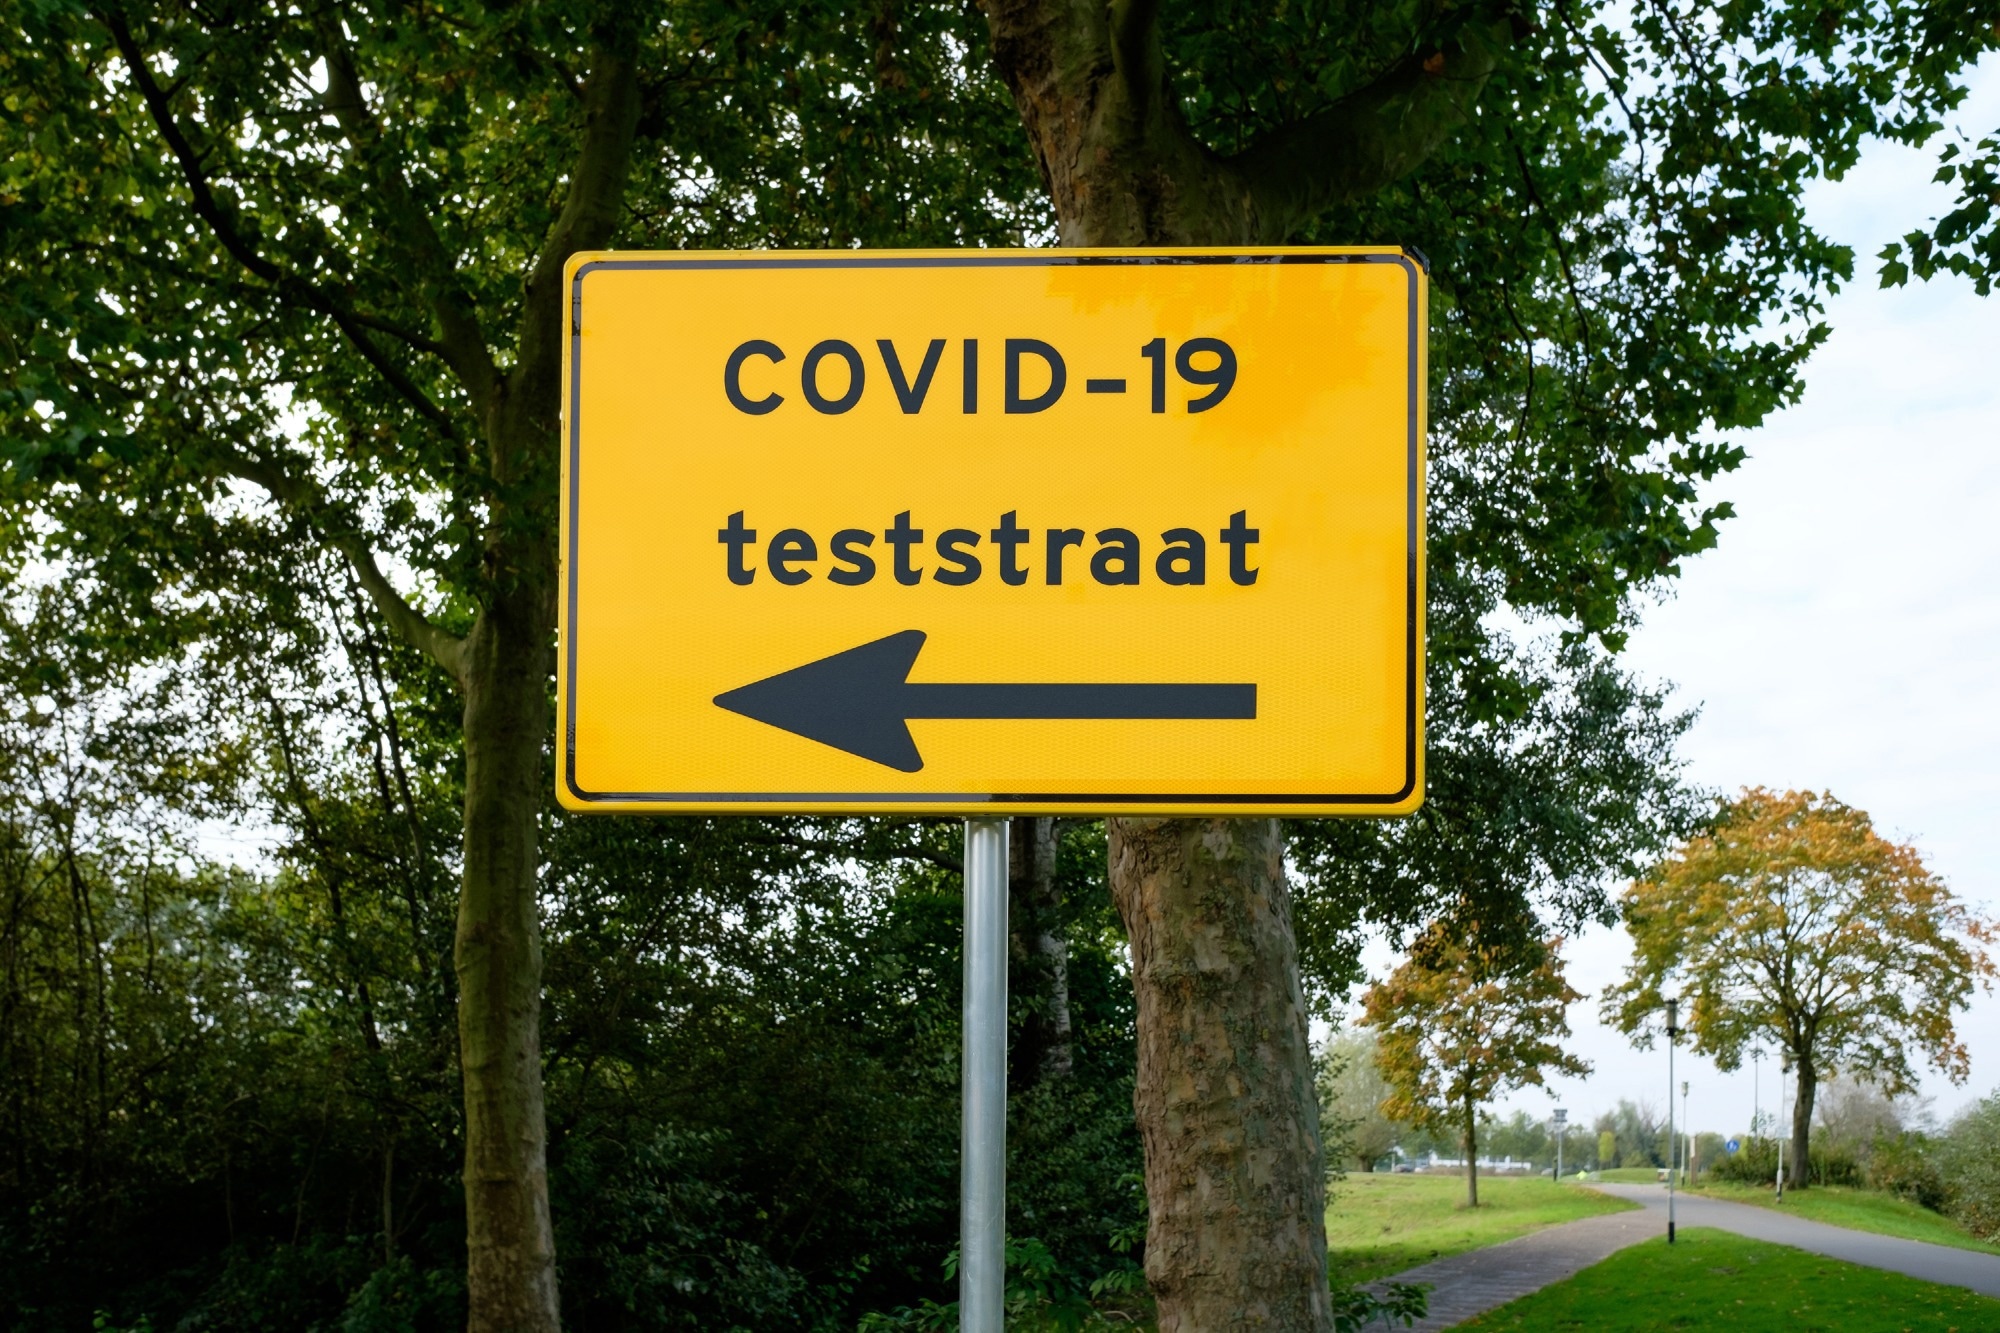 Study: Number of COVID-19 hospitalisations averted by vaccination: Estimates for the Netherlands, January 6, 2021 through August 30, 2022. Image Credit: Hung Chung Chih / Shutterstock